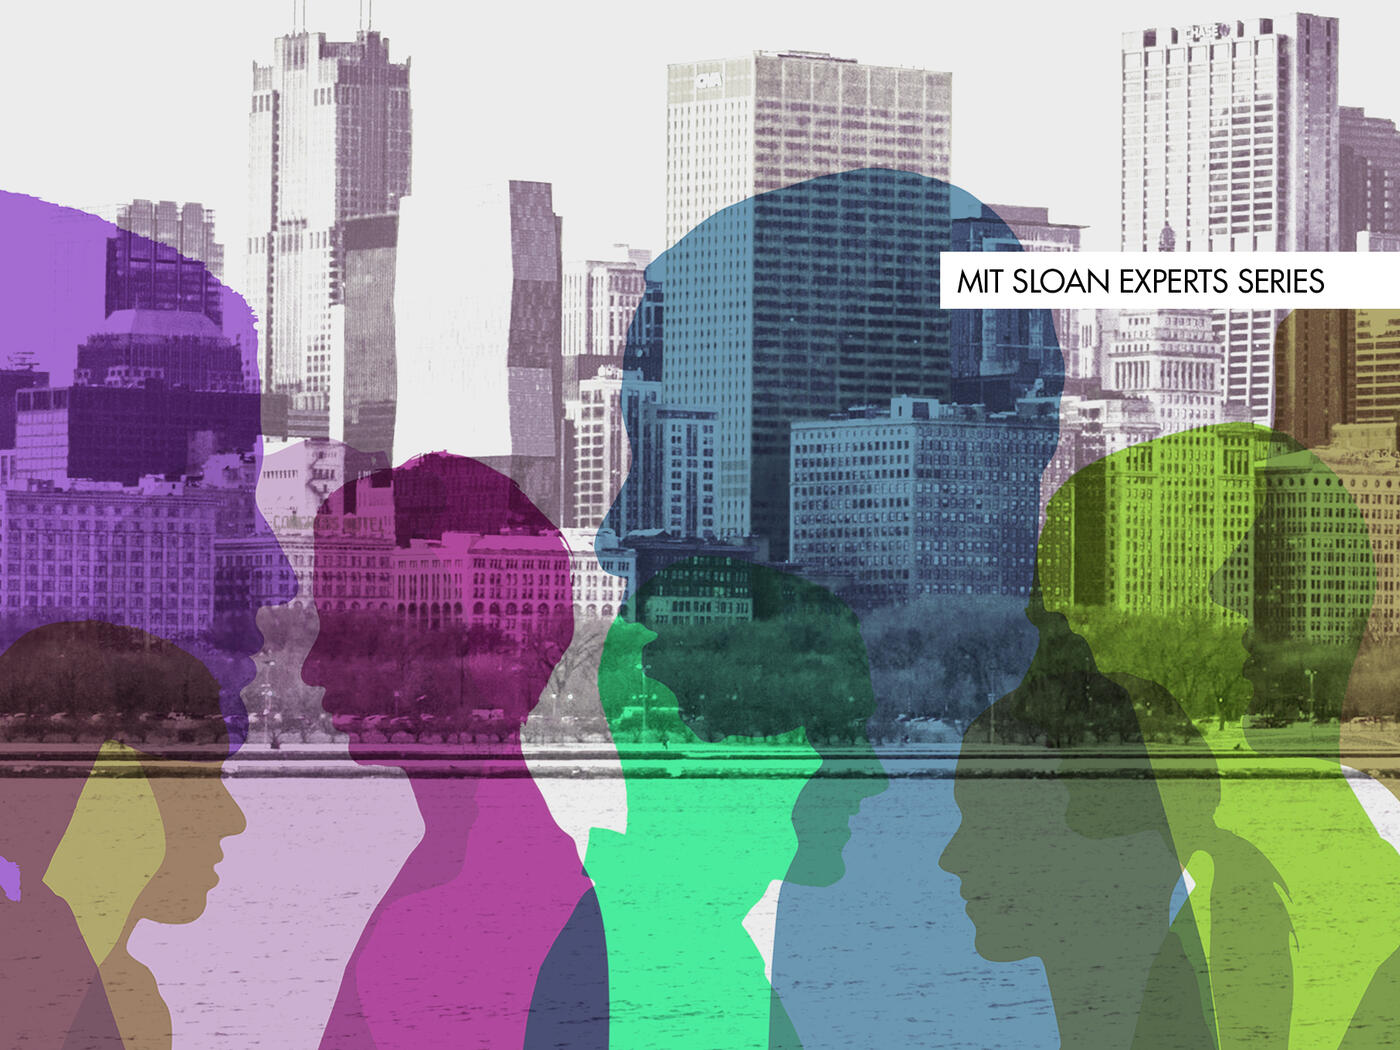 A collage of silhouettes of people over a city skyline